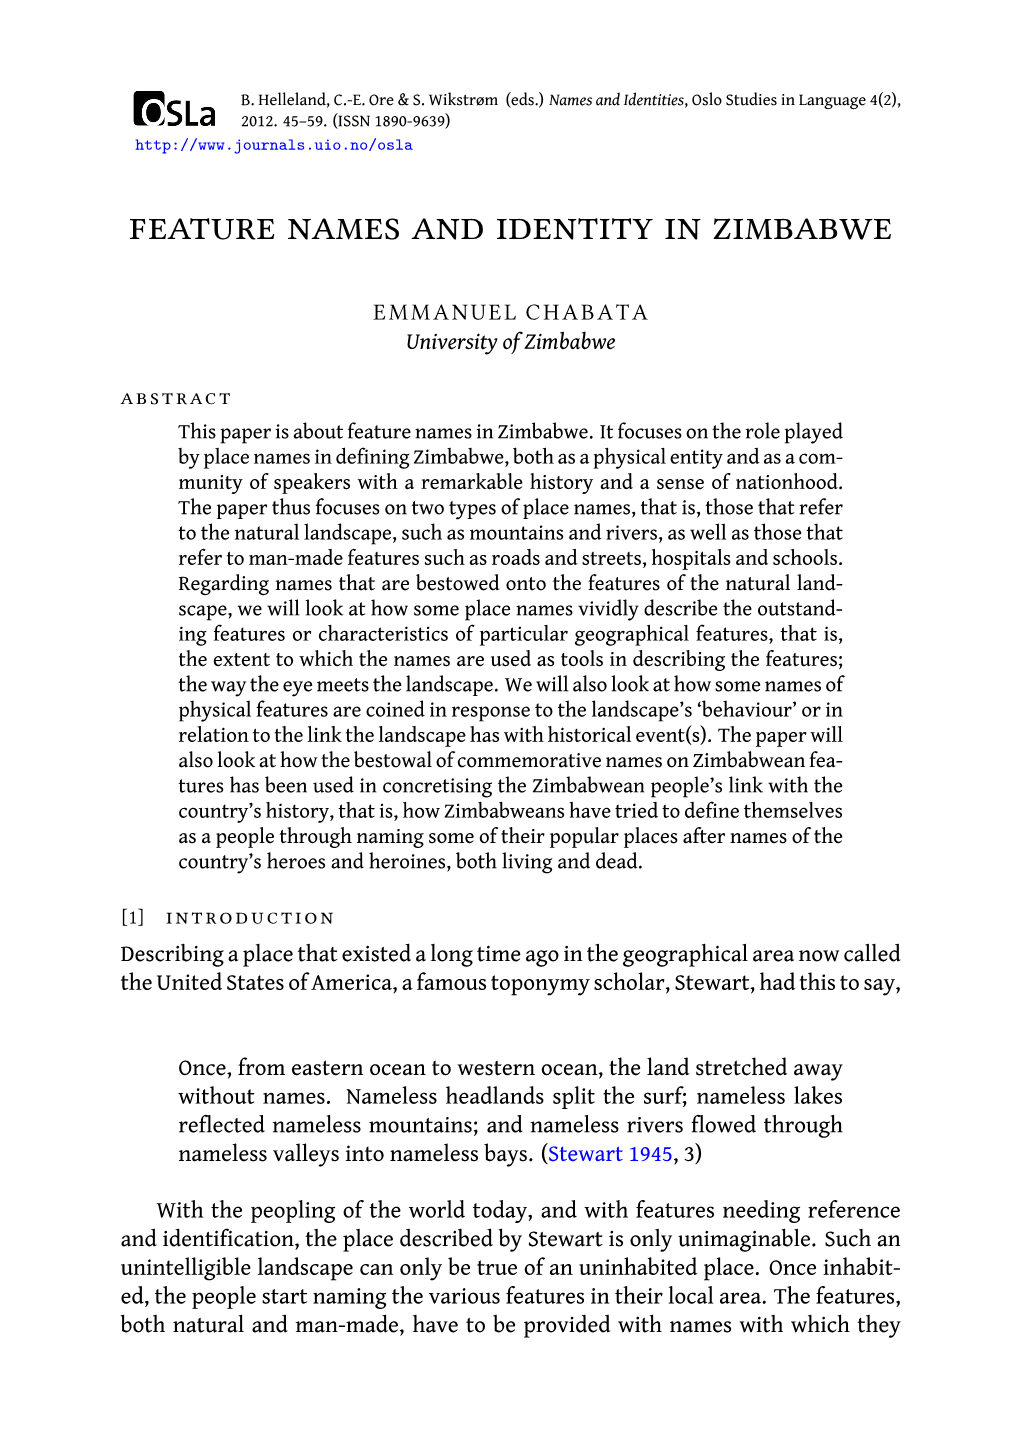 Feature Names and Identity in Zimbabwe